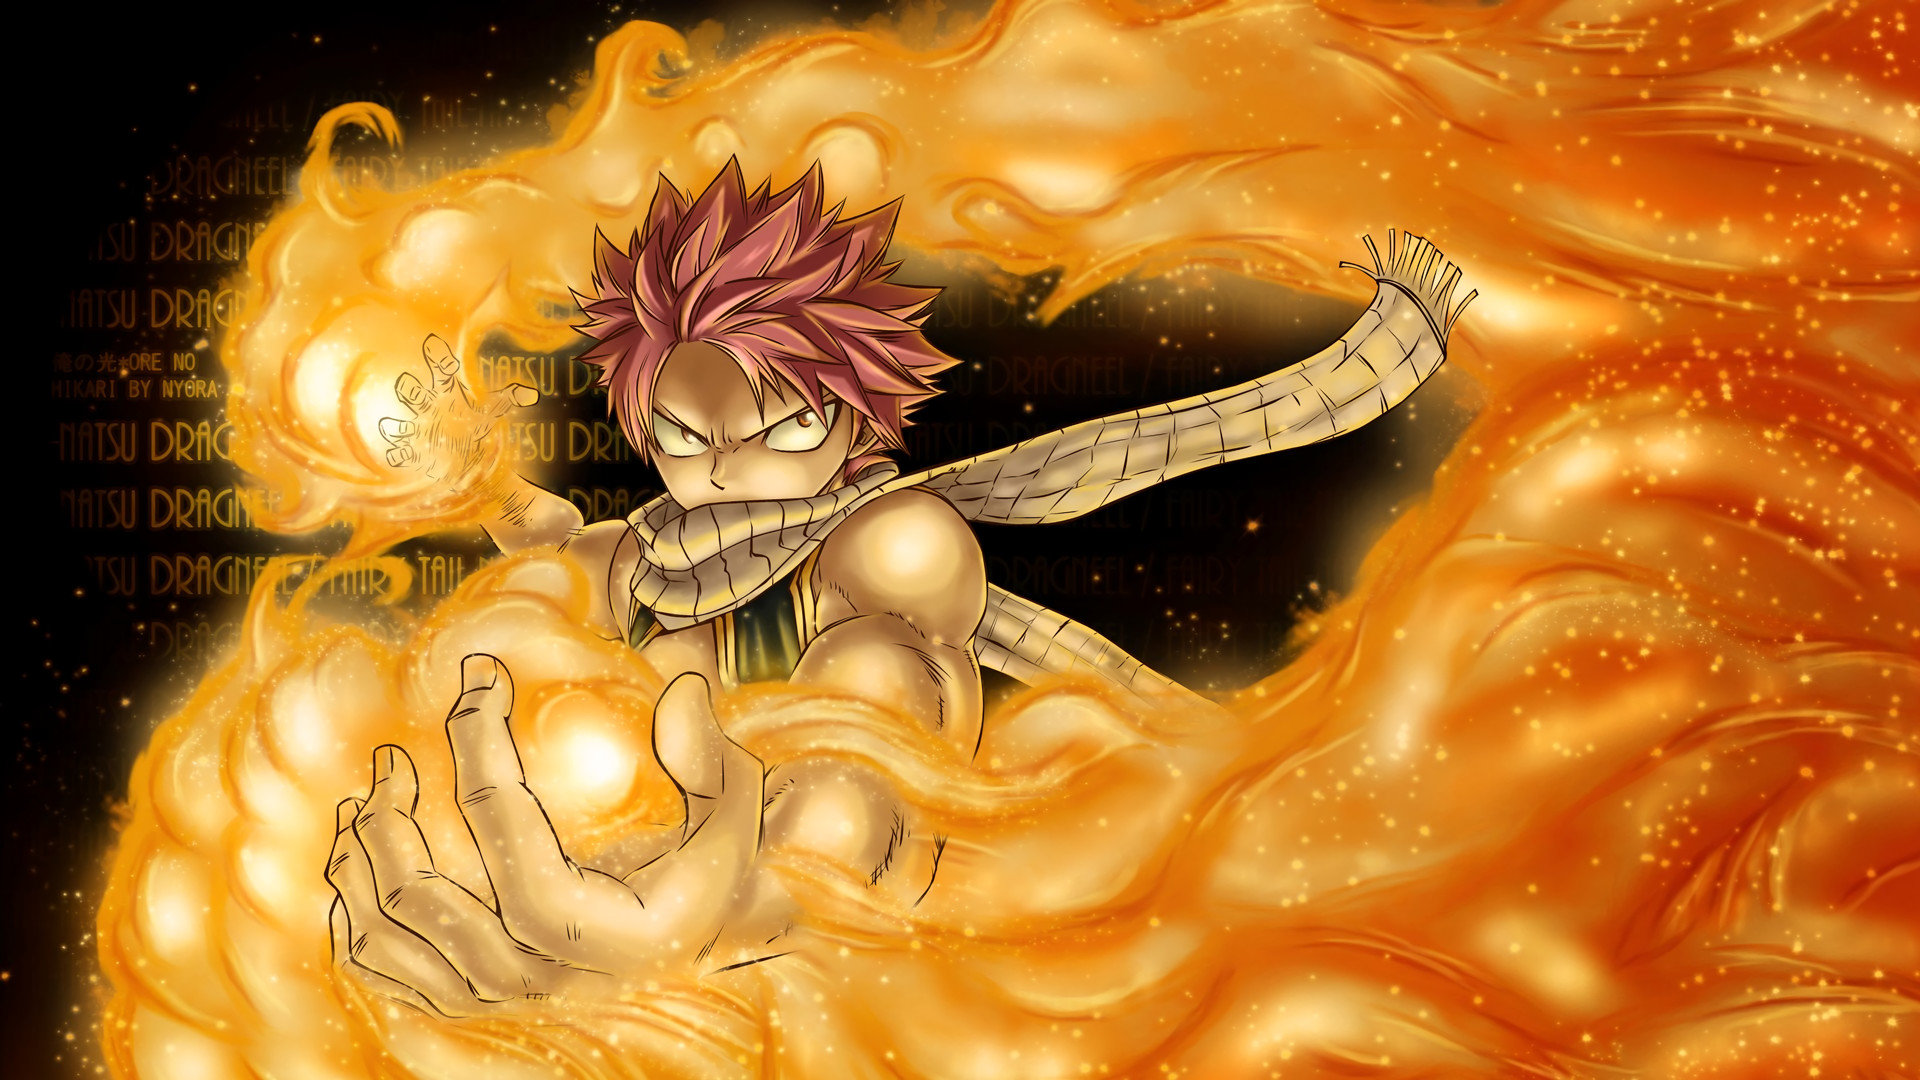 672 Natsu Dragneel Hd Wallpapers Background Images. 